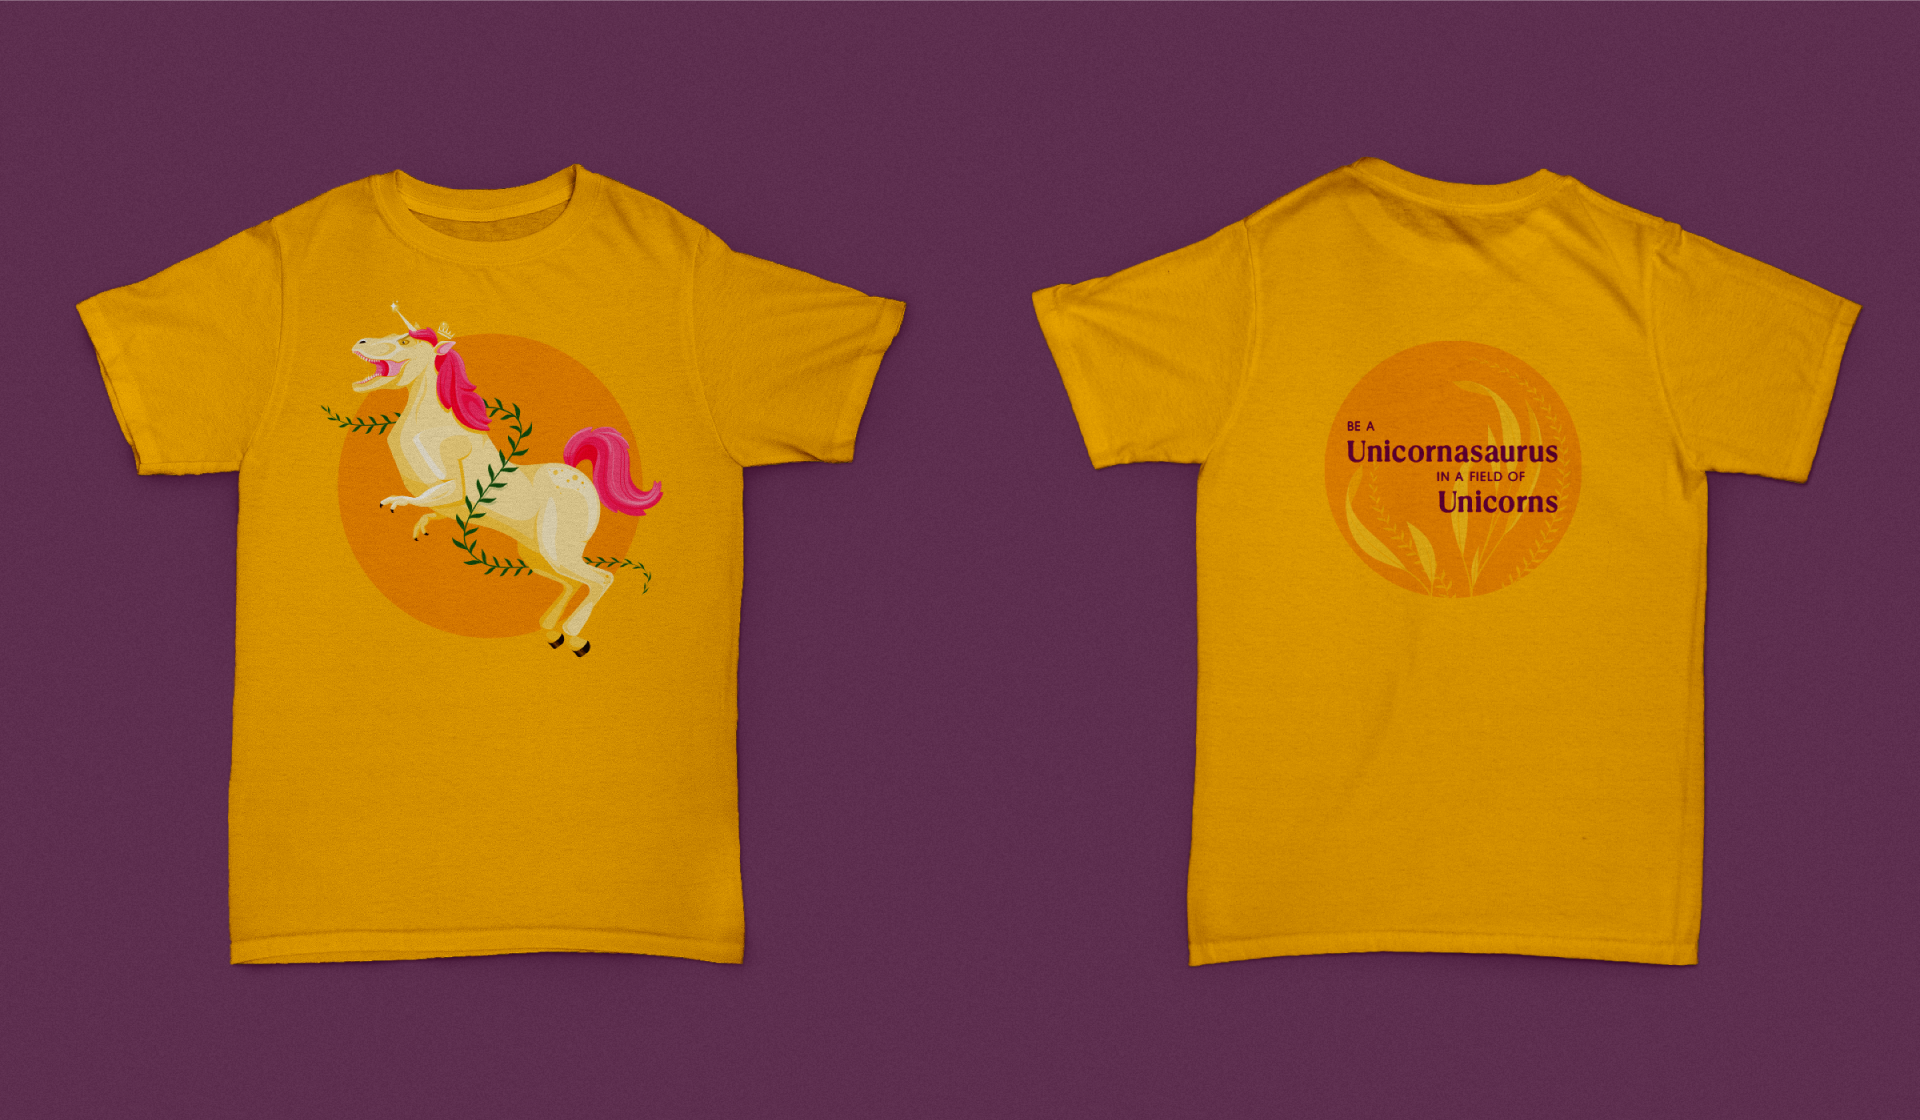 T-shirt mockup with the illustration on the front and "Be a Unicornasaurus in a field of unicorns" on the back